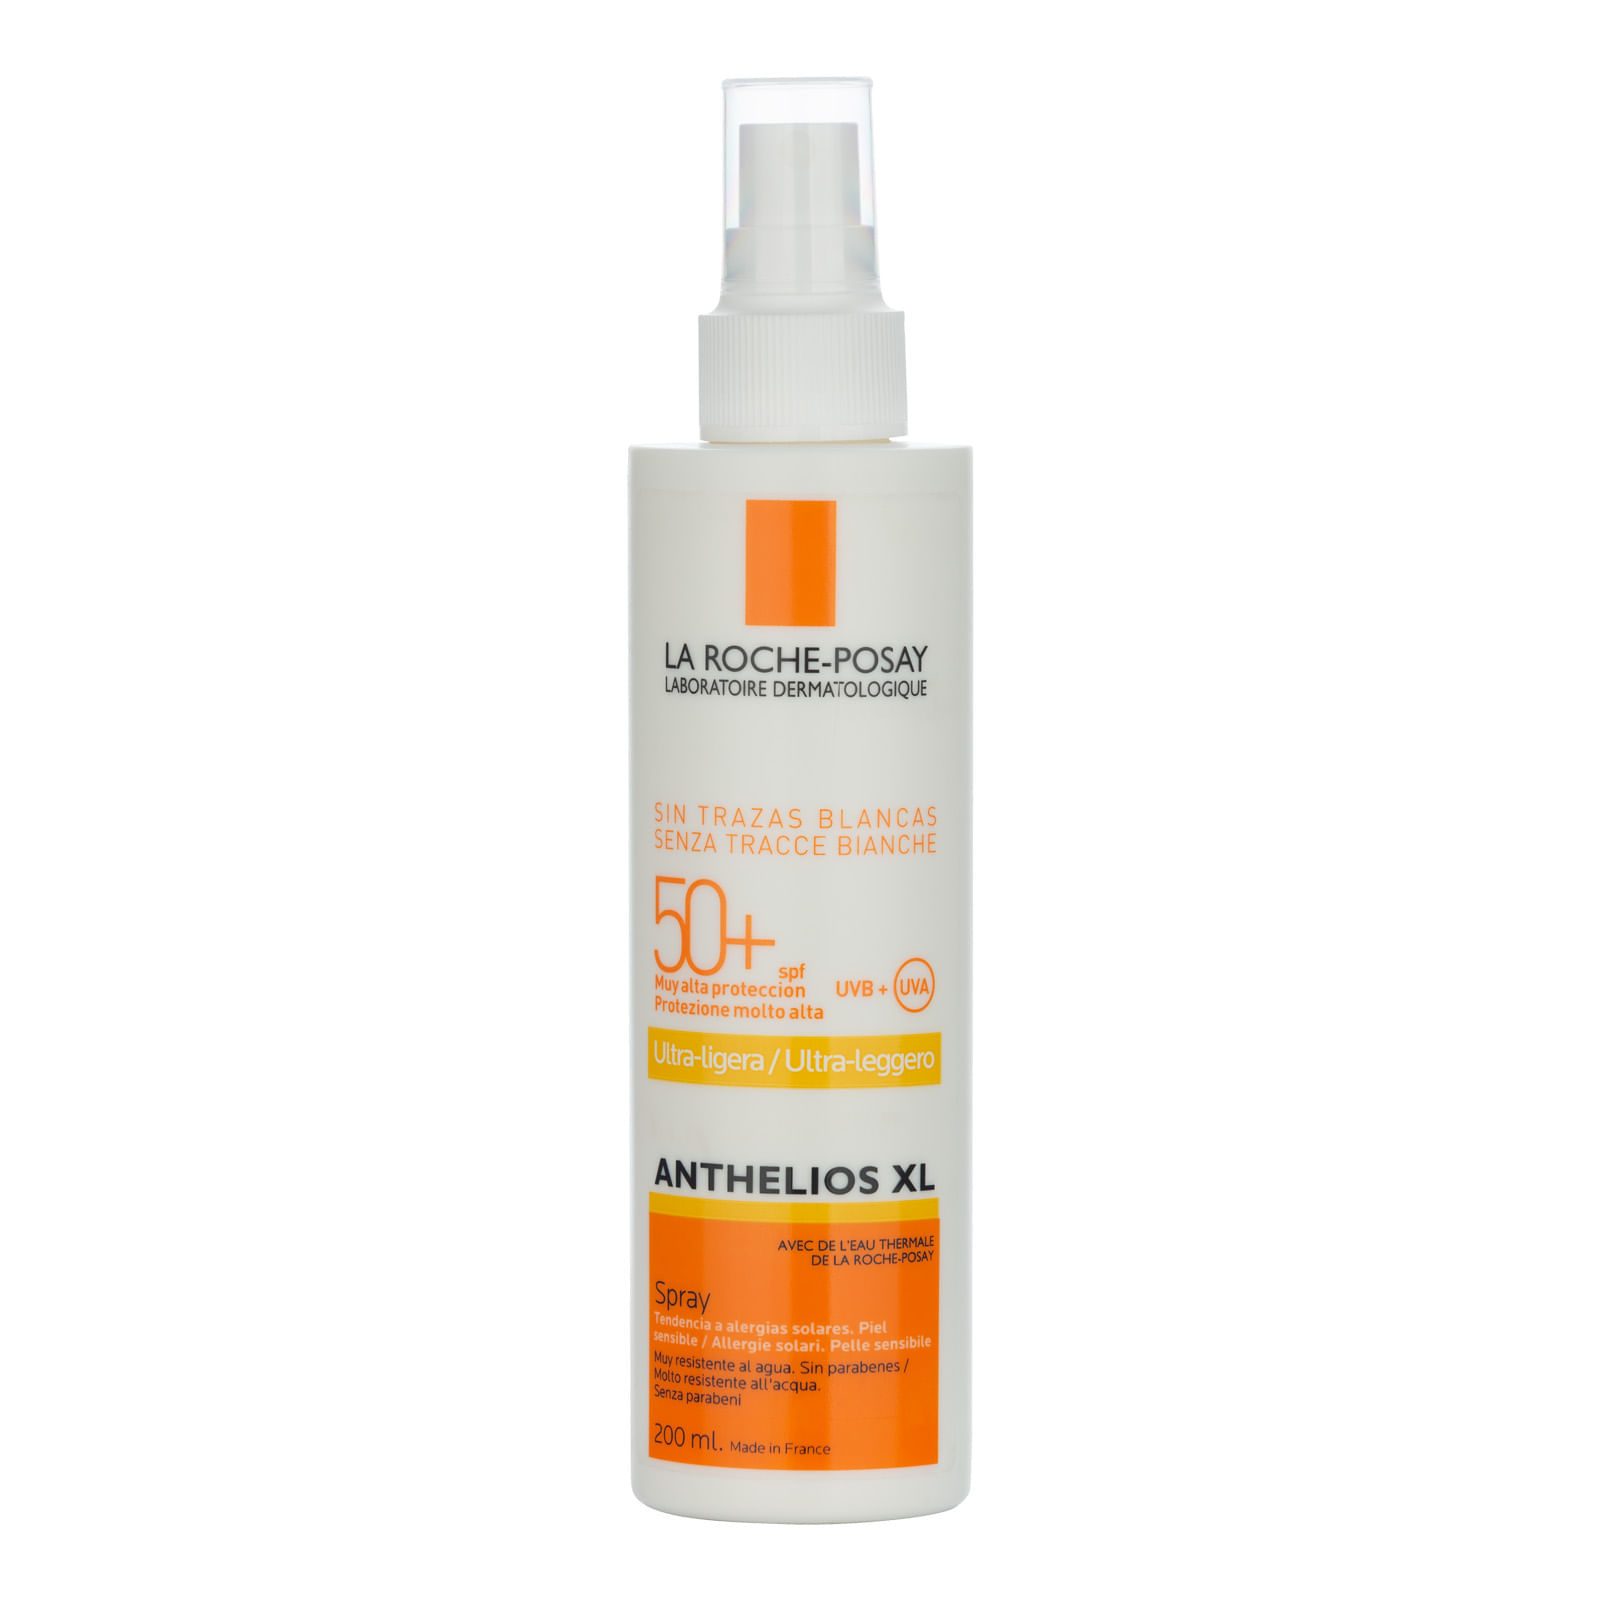 ROCHE-POSAY ANTHELIOS Invisible Spray LSF 50+, 200 ml, PZN